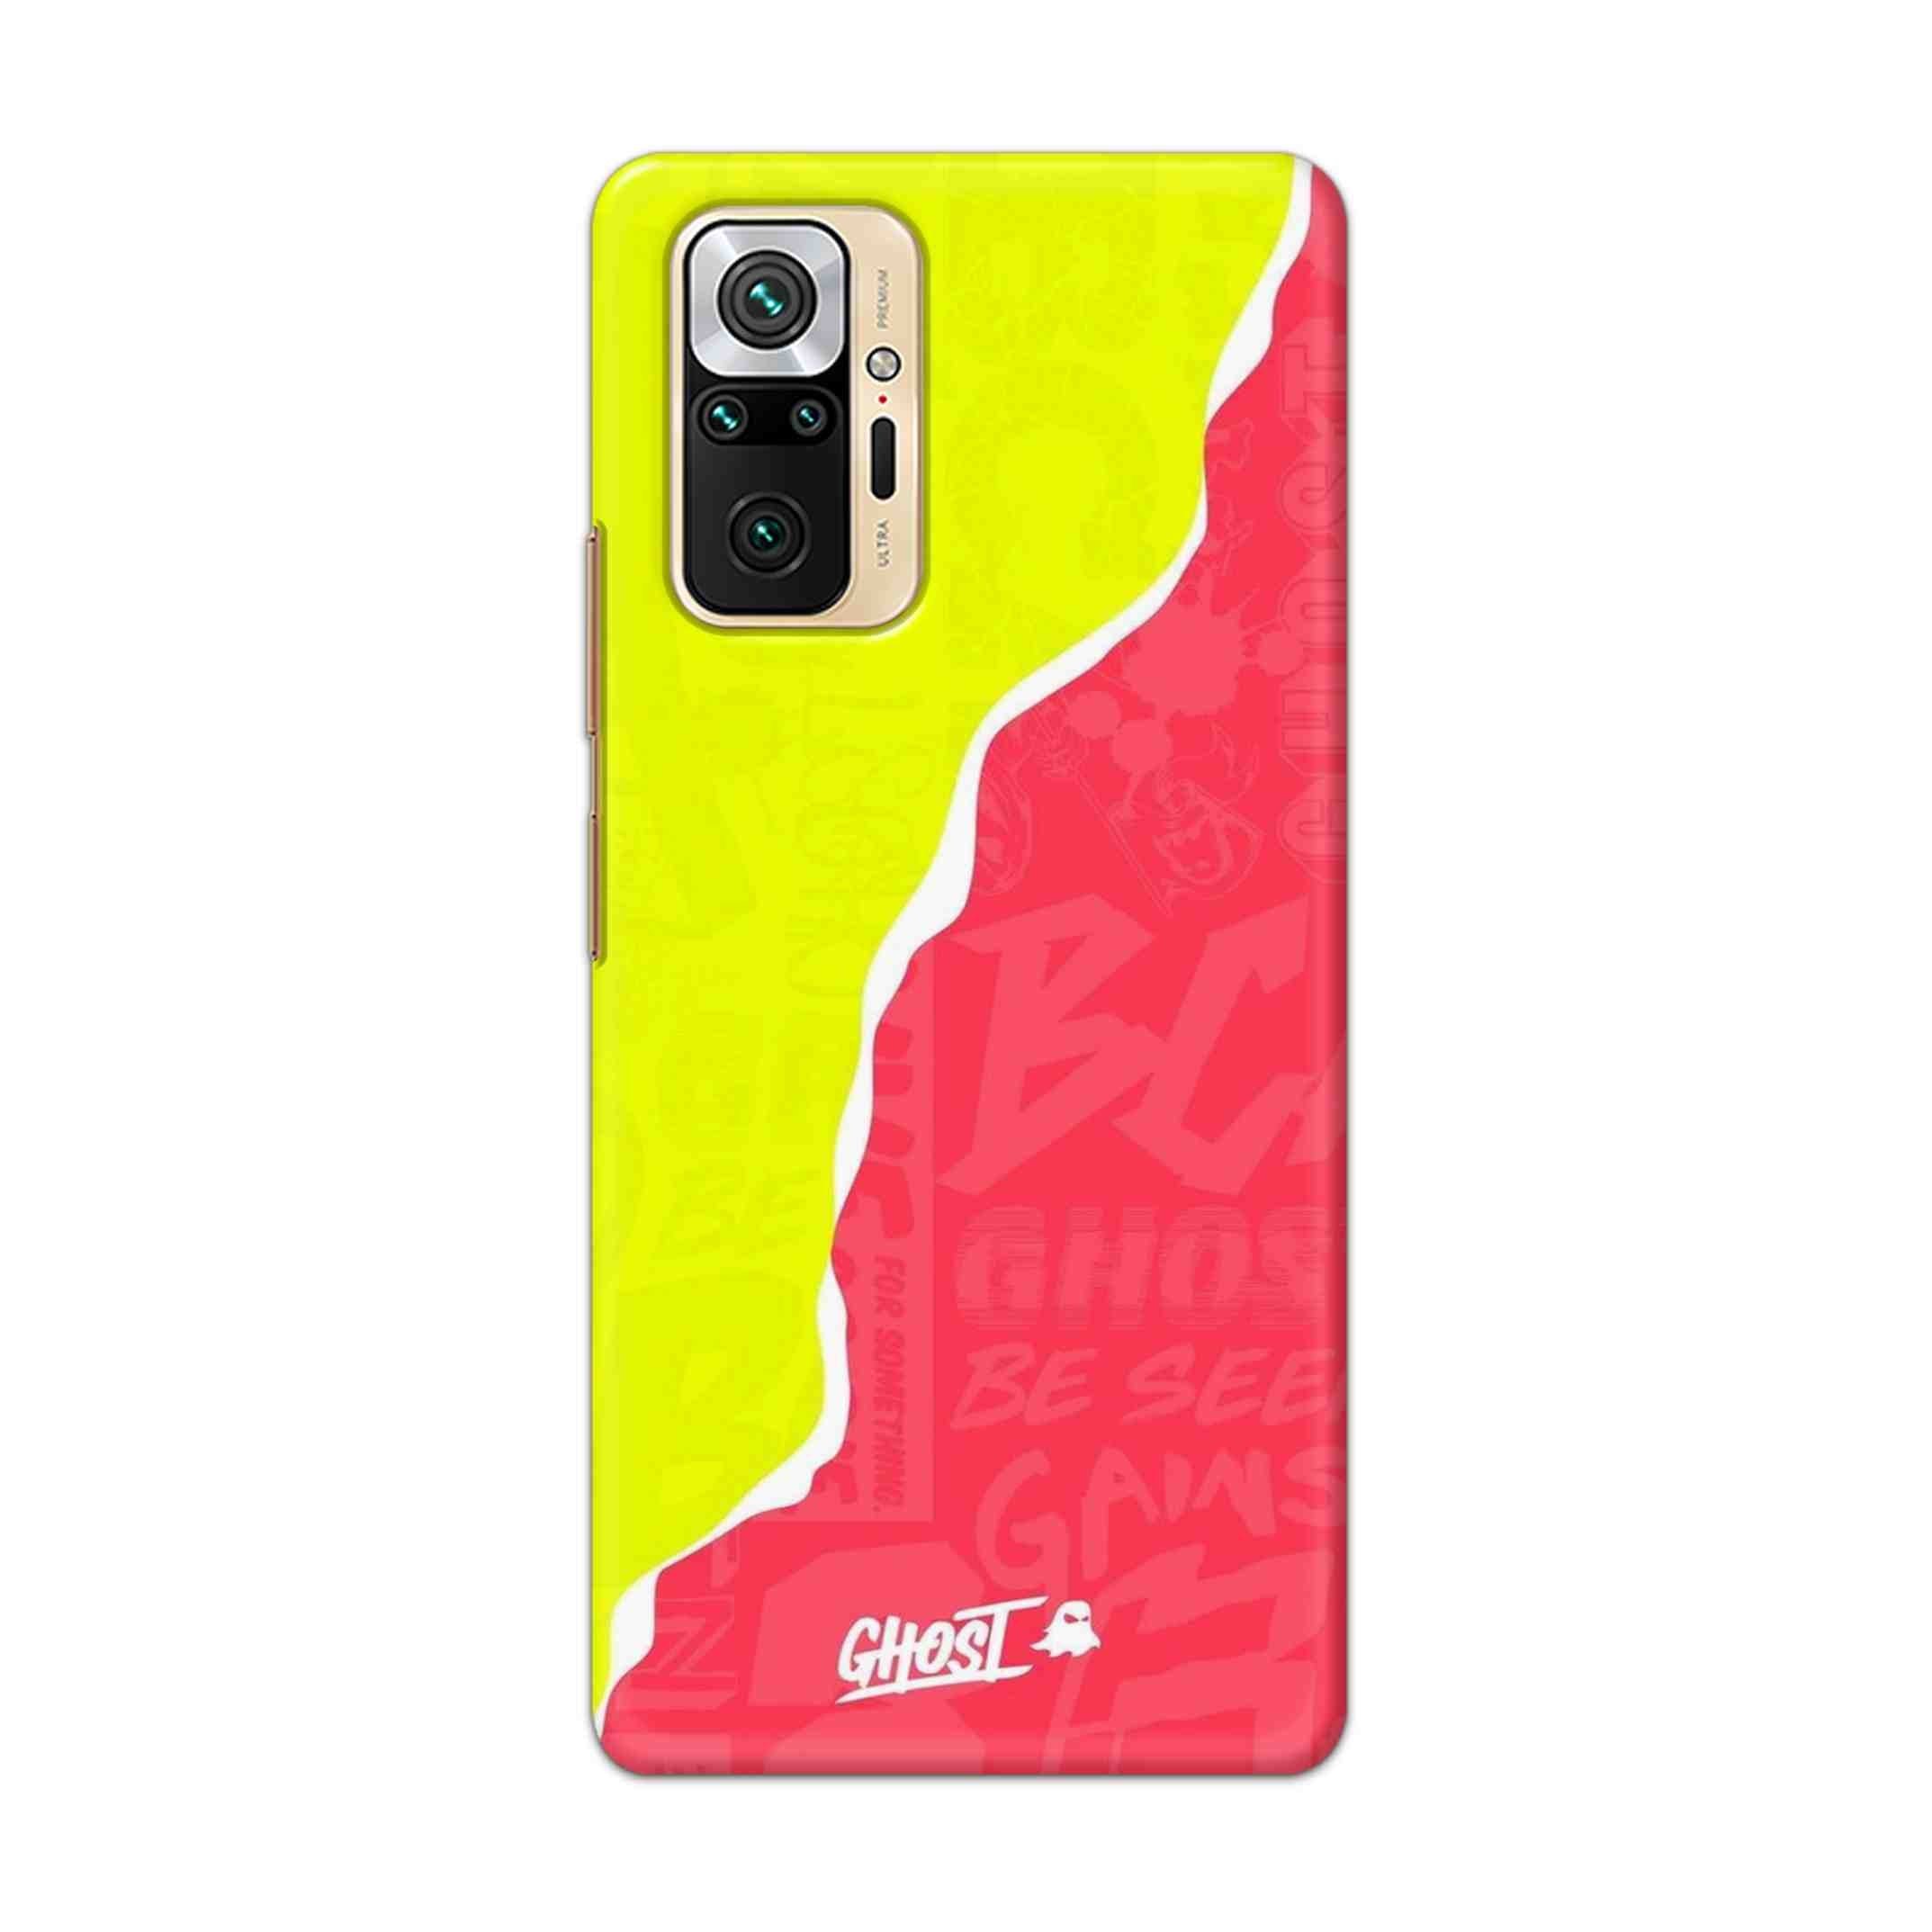 Buy Ghost Hard Back Mobile Phone Case Cover For Redmi Note 10 Pro Online